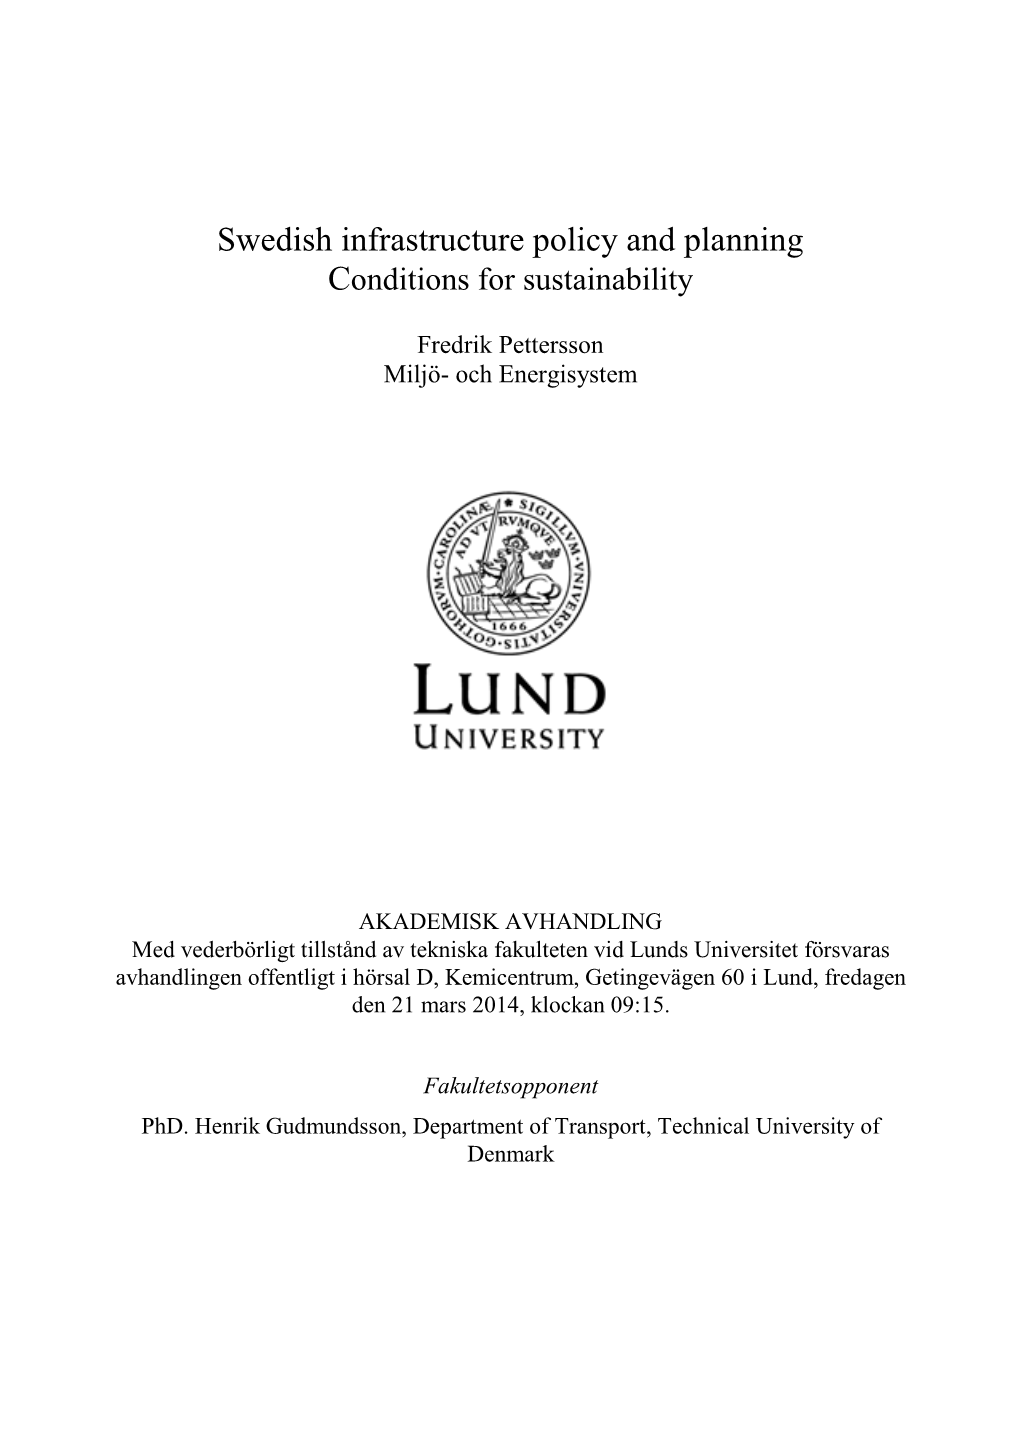 Swedish Infrastructure Policy and Planning Conditions for Sustainability